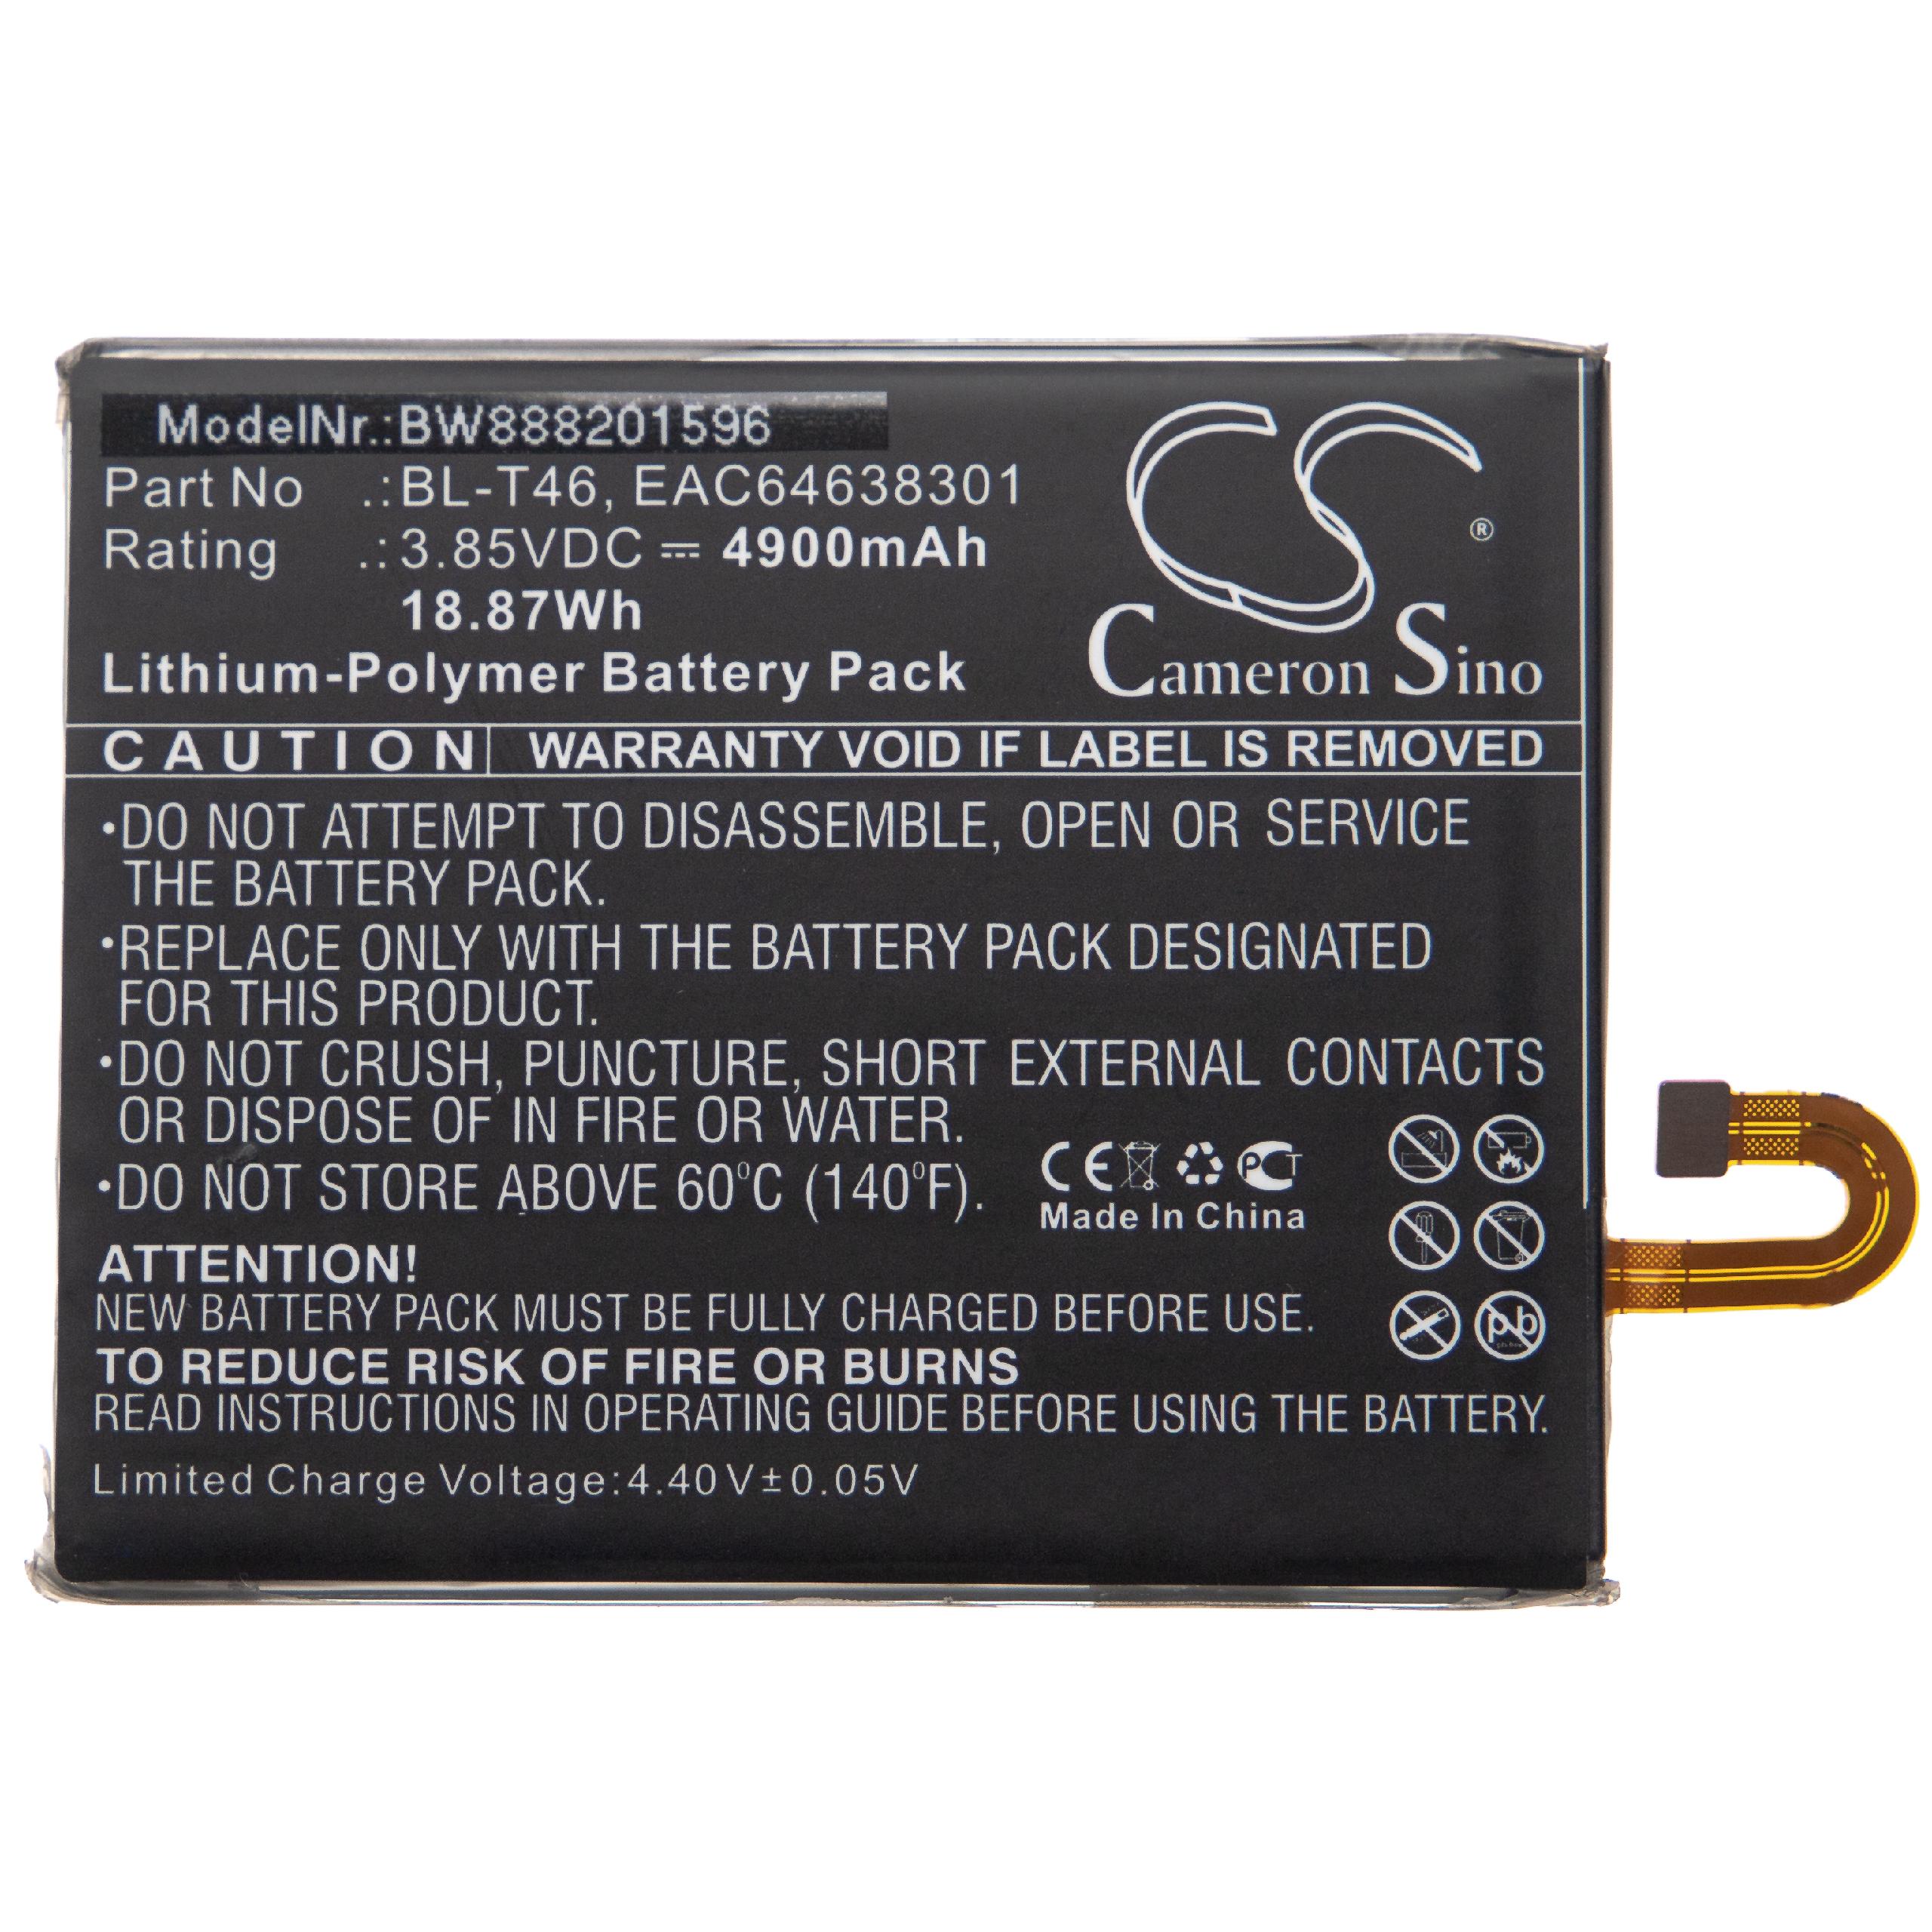 Mobile Phone Battery Replacement for LG BL-T46, EAC64638301 - 4900mAh 3.85V Li-polymer